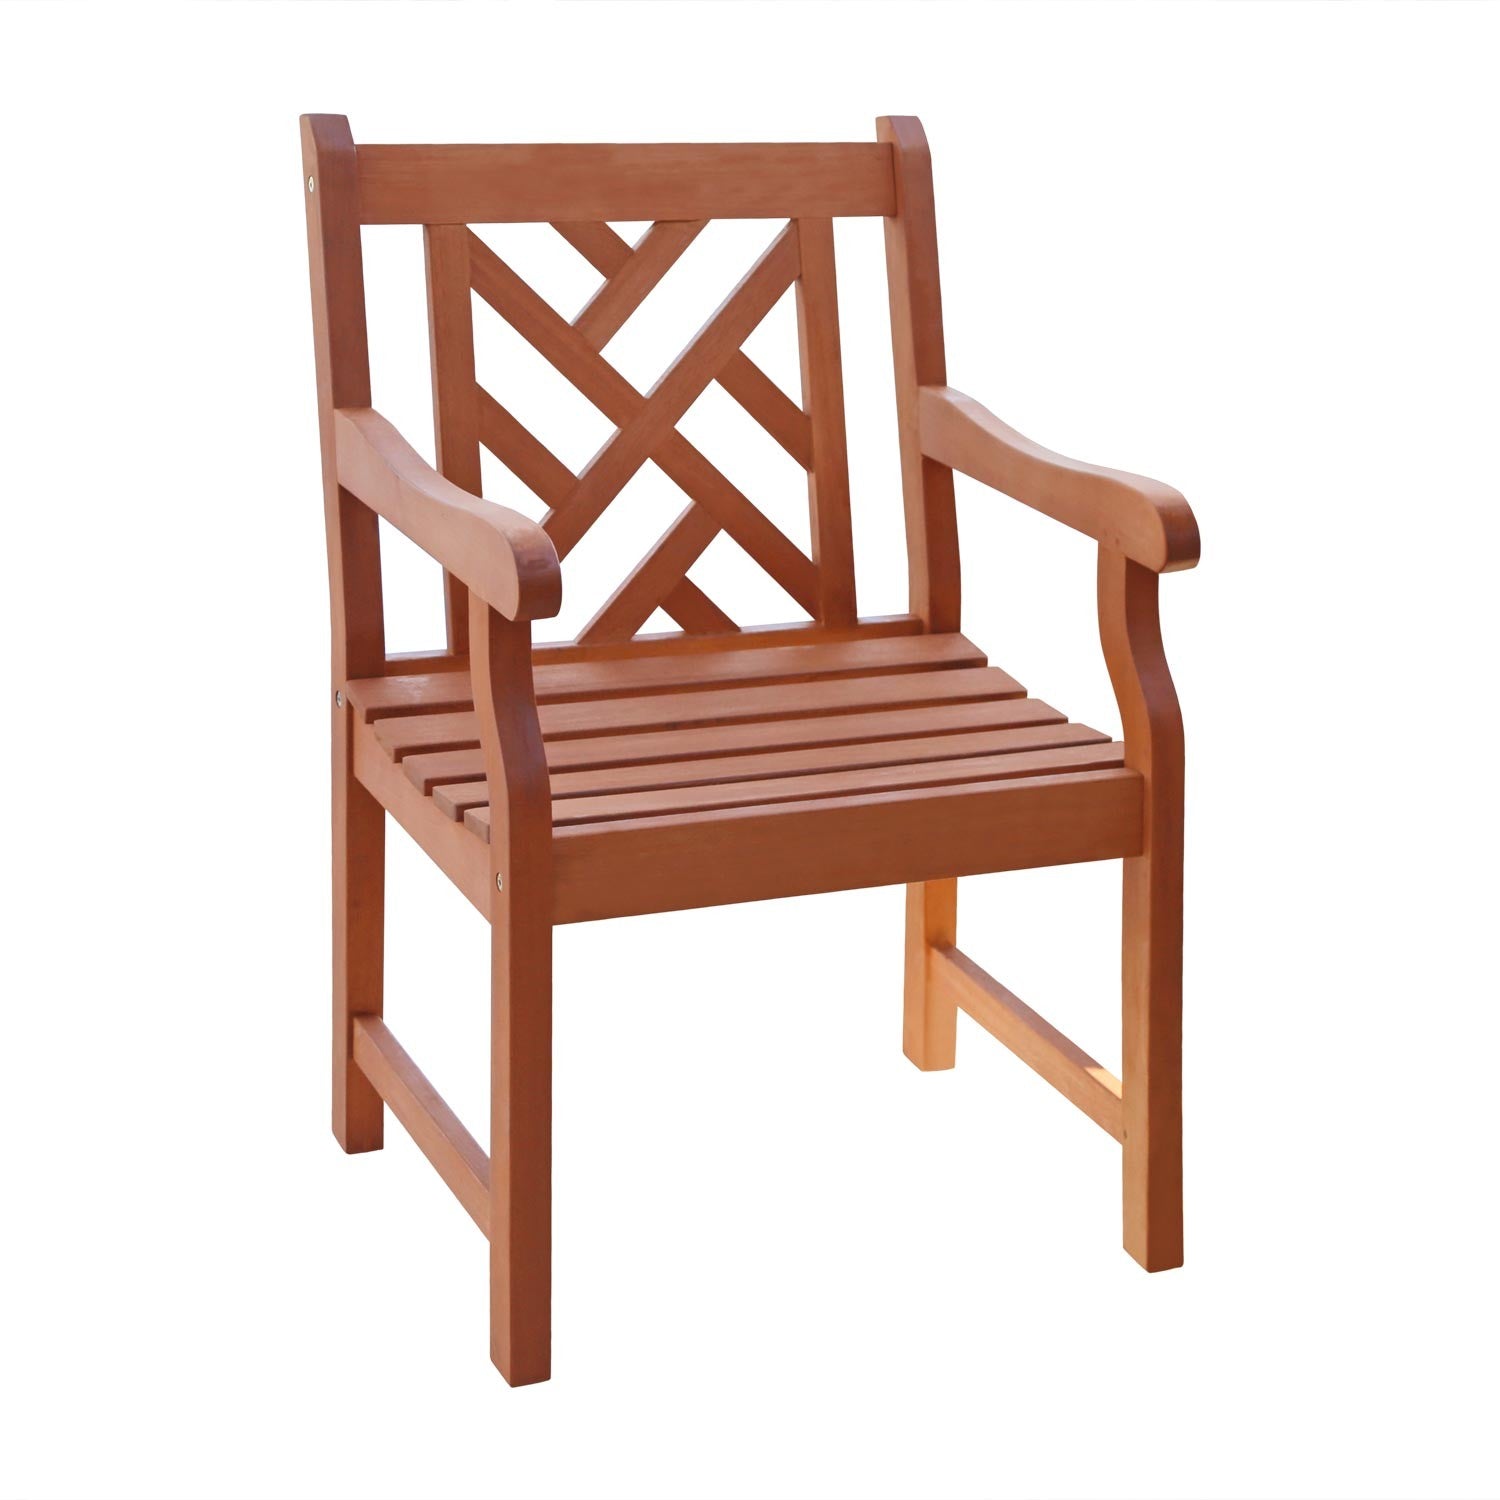 Brown-Patio-Armchair-With-Diagonal-Design-Outdoor-Chairs